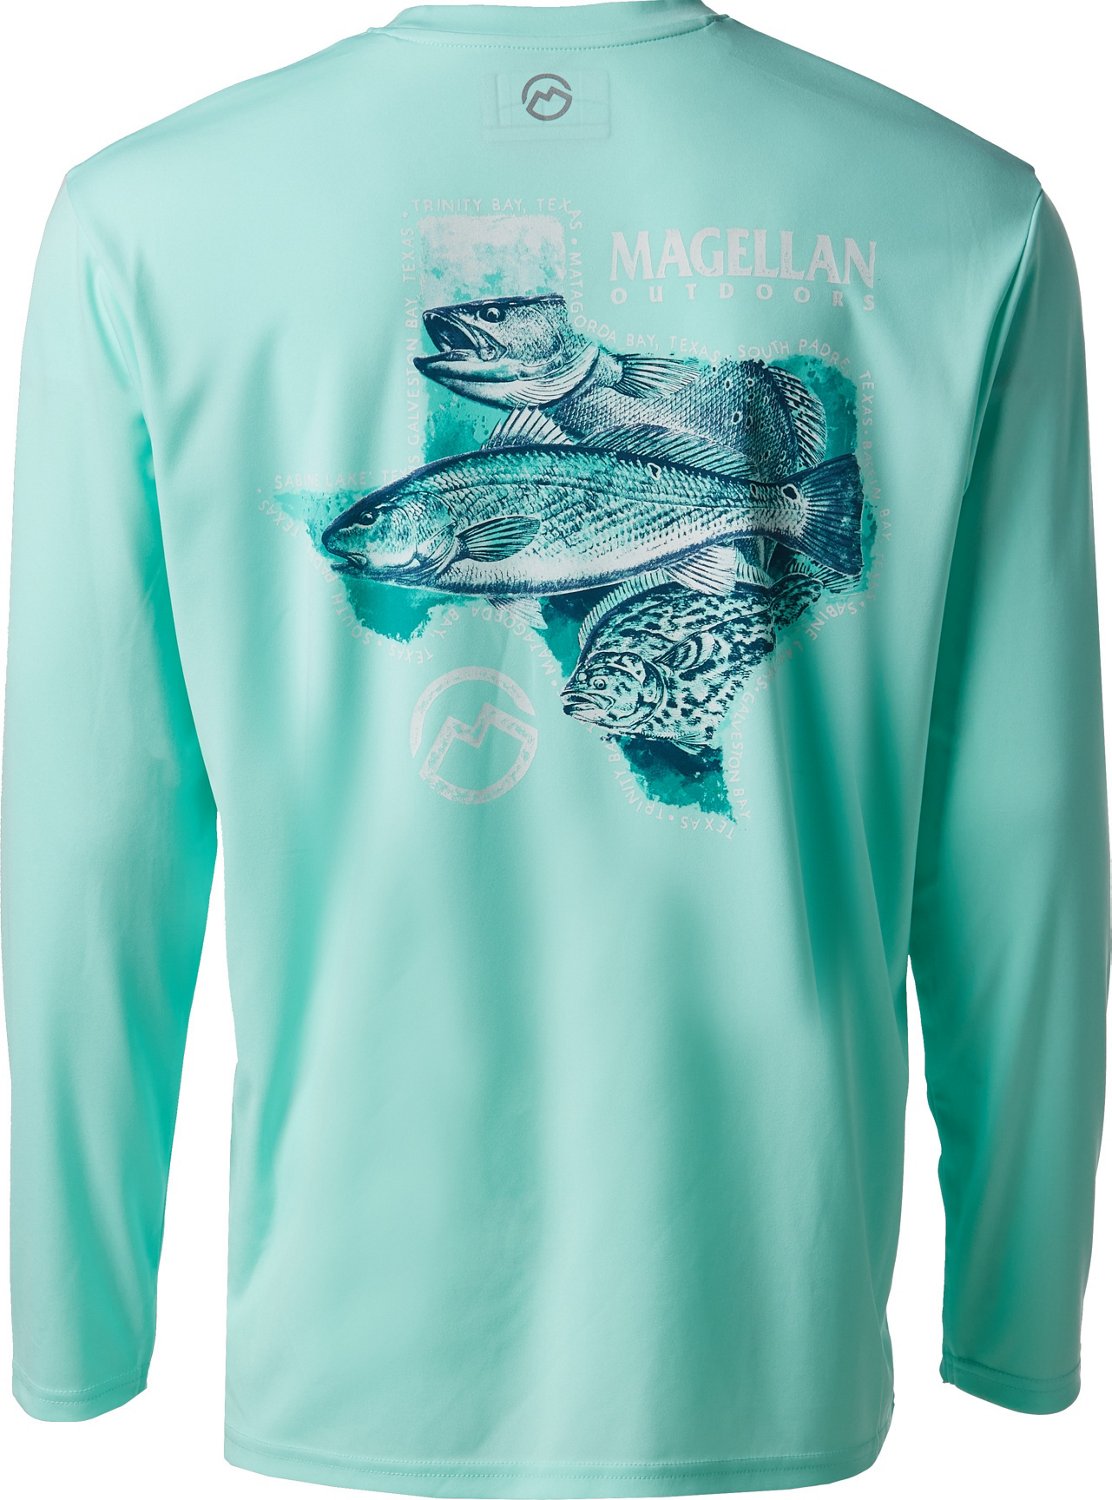 Magellan Outdoors Men's Local State Graphic Texas Crew Long Sleeve T ...